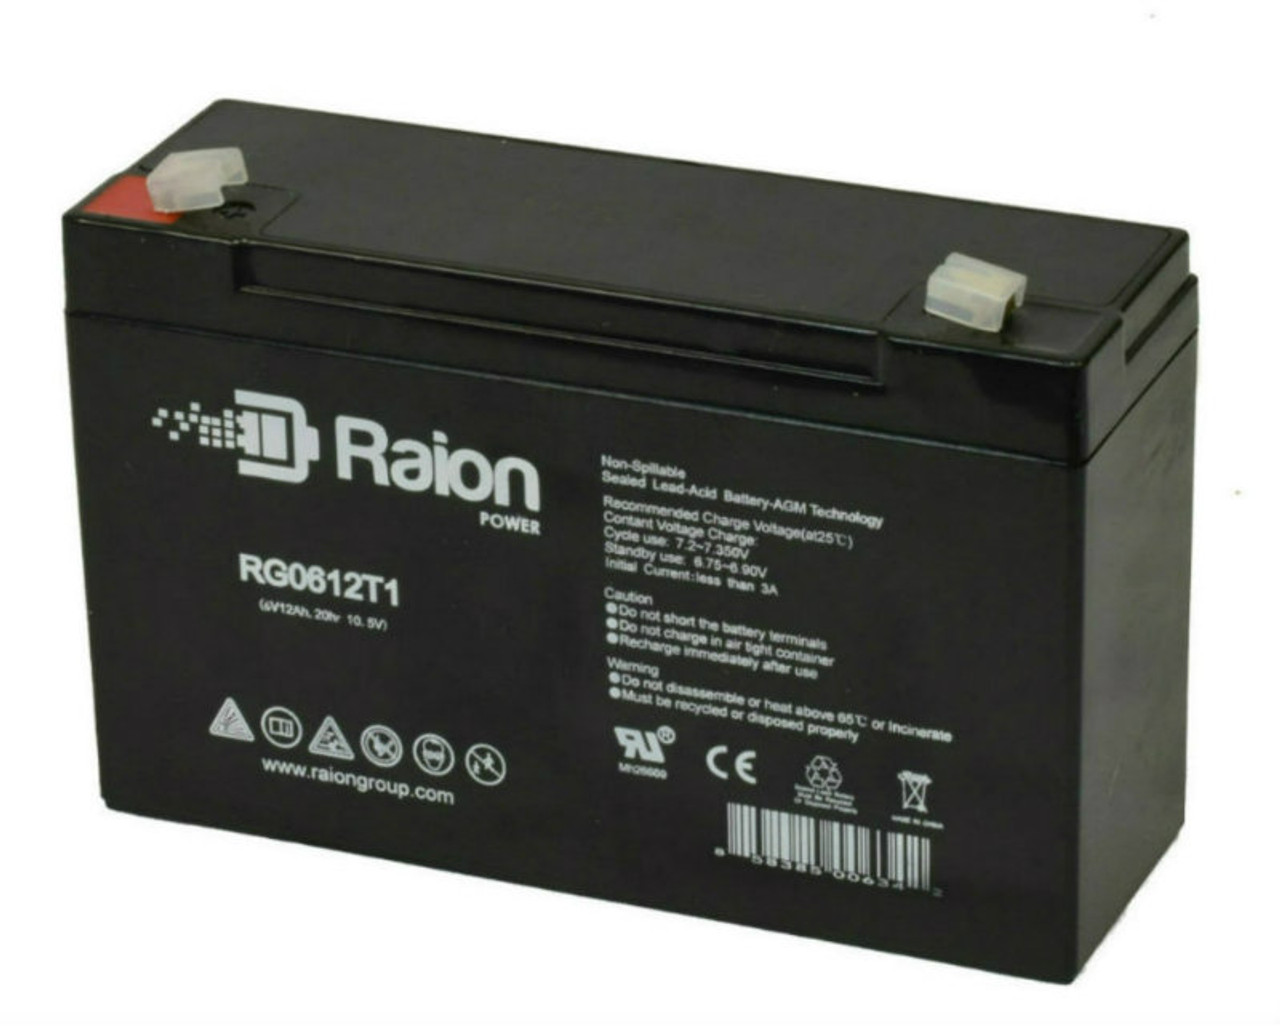 Raion Power RG06120T1 Replacement 6V 12Ah Emergency Light Battery for GS Portalac PE106R